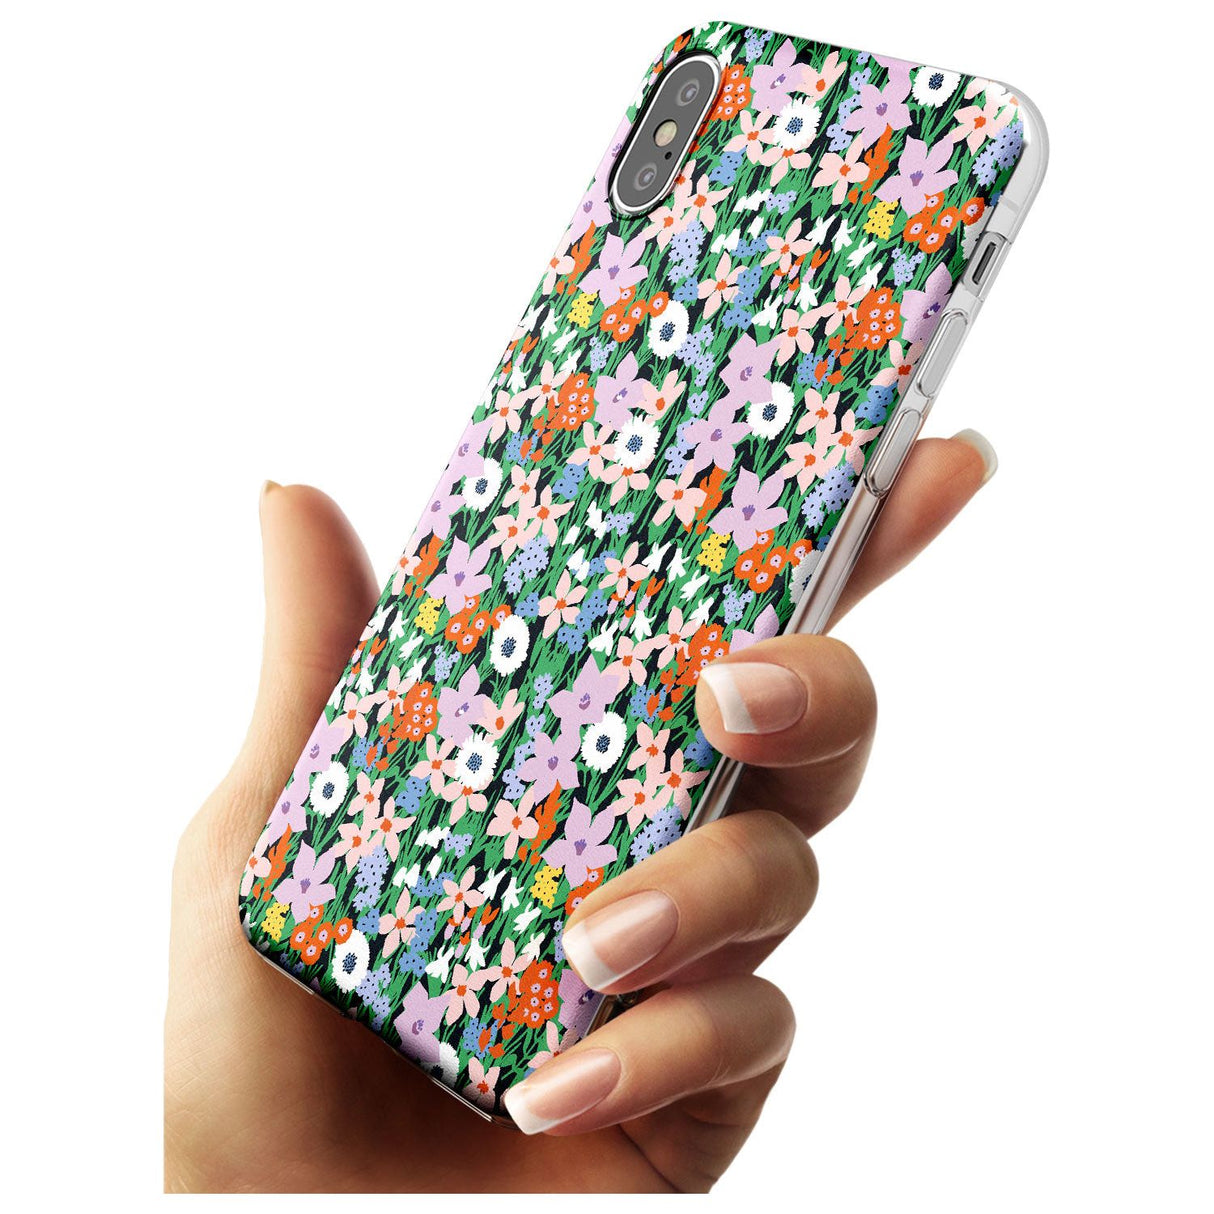 Jazzy Floral Mix: Solid Black Impact Phone Case for iPhone X XS Max XR